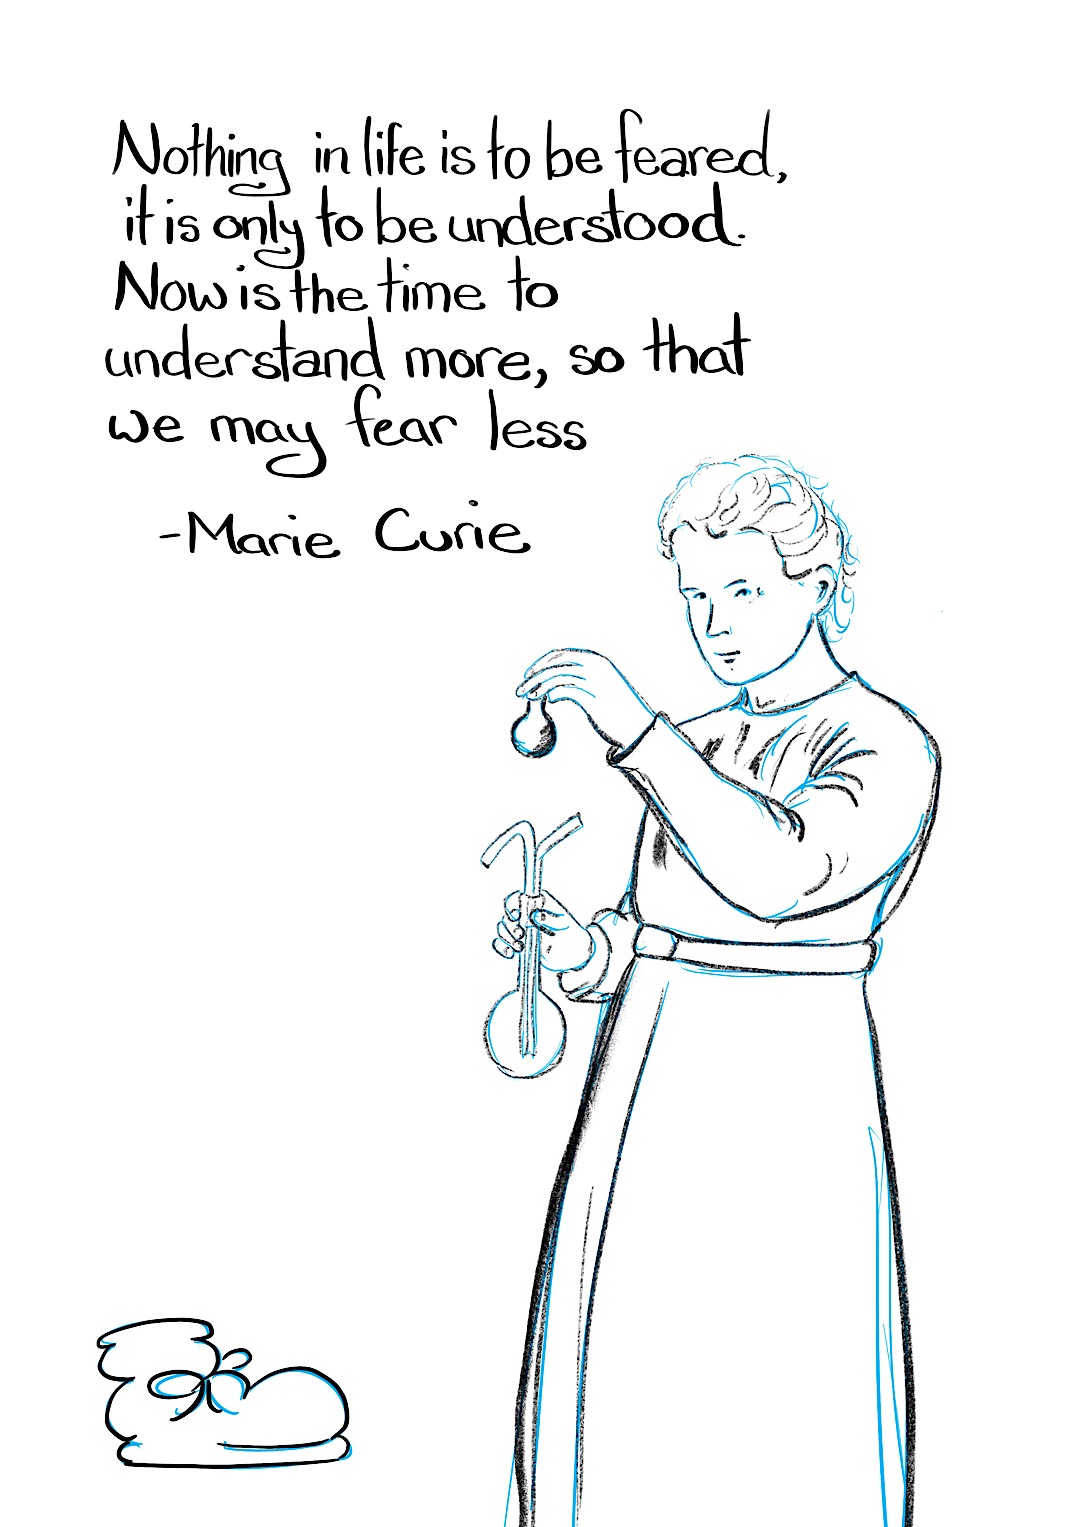 582: Marie Curie and Boot